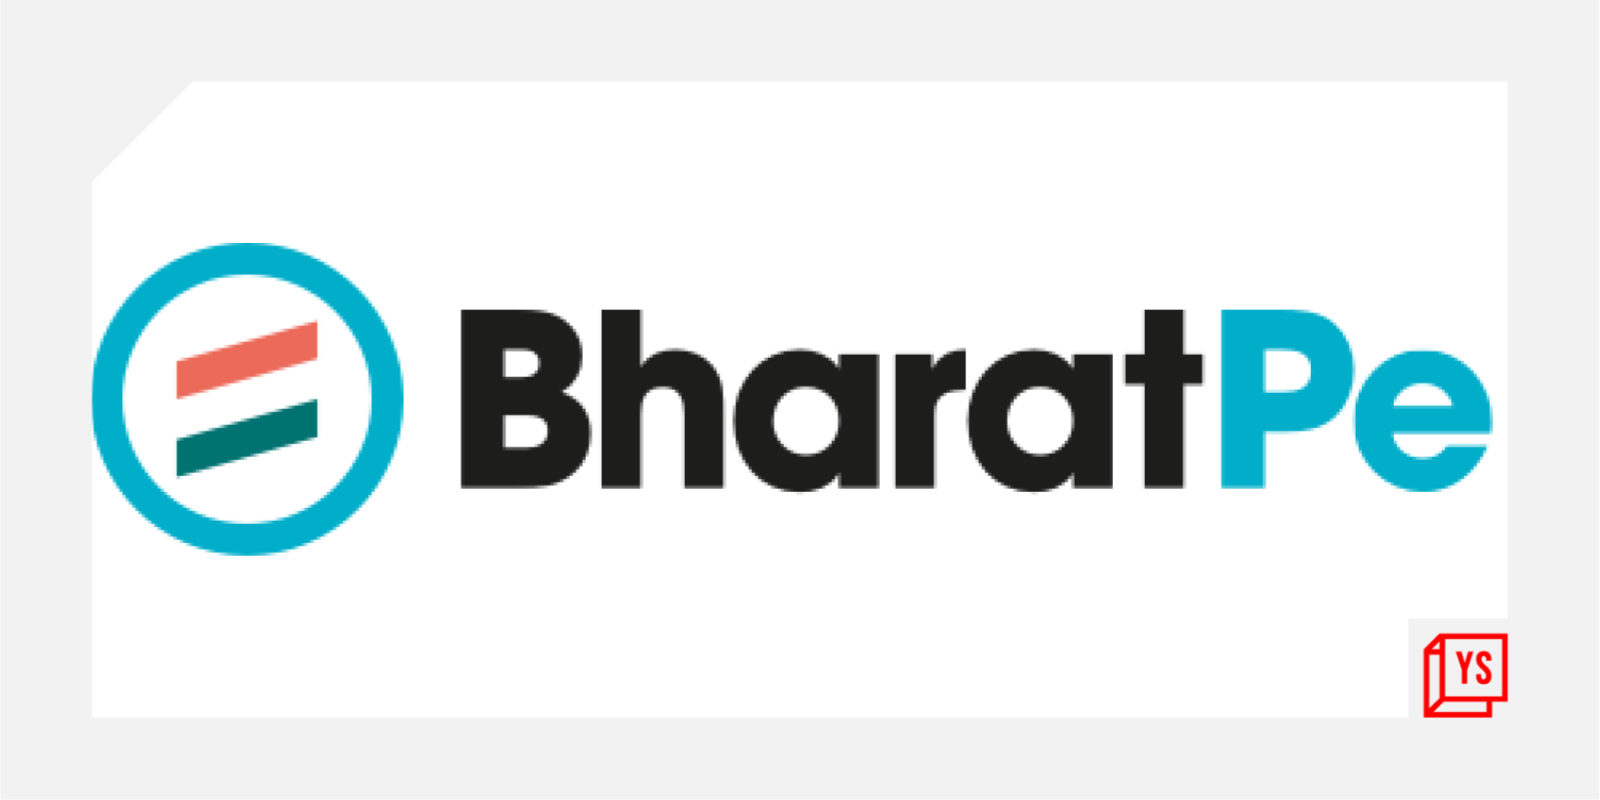 BharatPe appoints exec from Alvarez & Marsal as interim CFO; search for permanent CFO in "advanced stages"